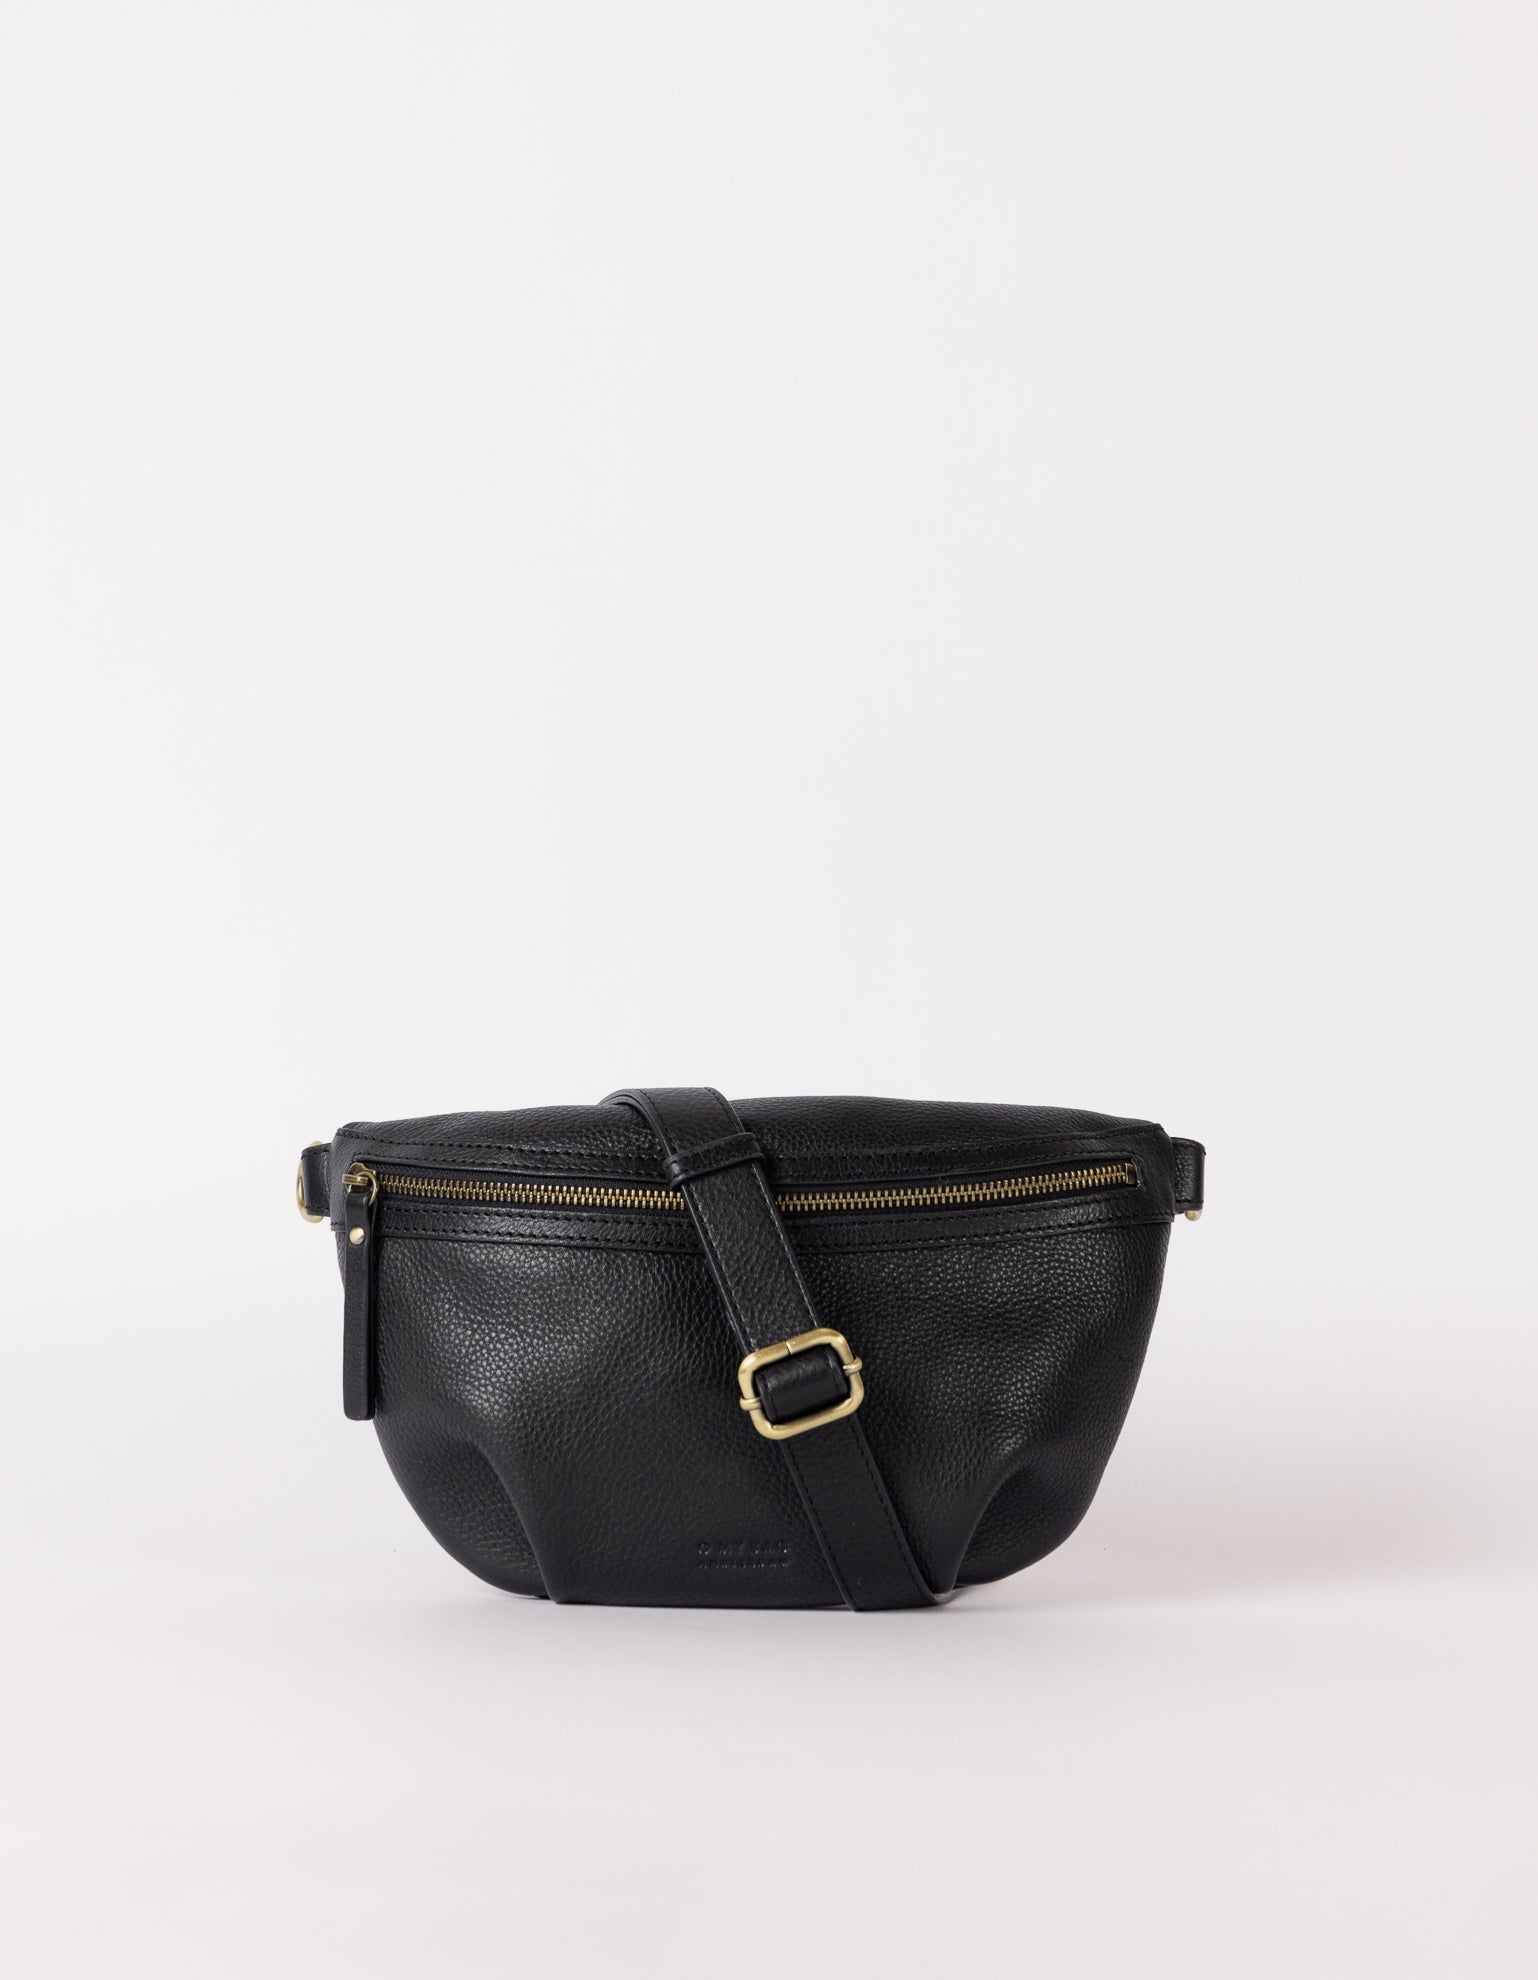 Milo, O My Bag's new soft grain bum bag, is the epitome of sleek practicality. This minimalist leather bum bag is designed for those who are always on the go and need their essentials handy. Ethically made in India.